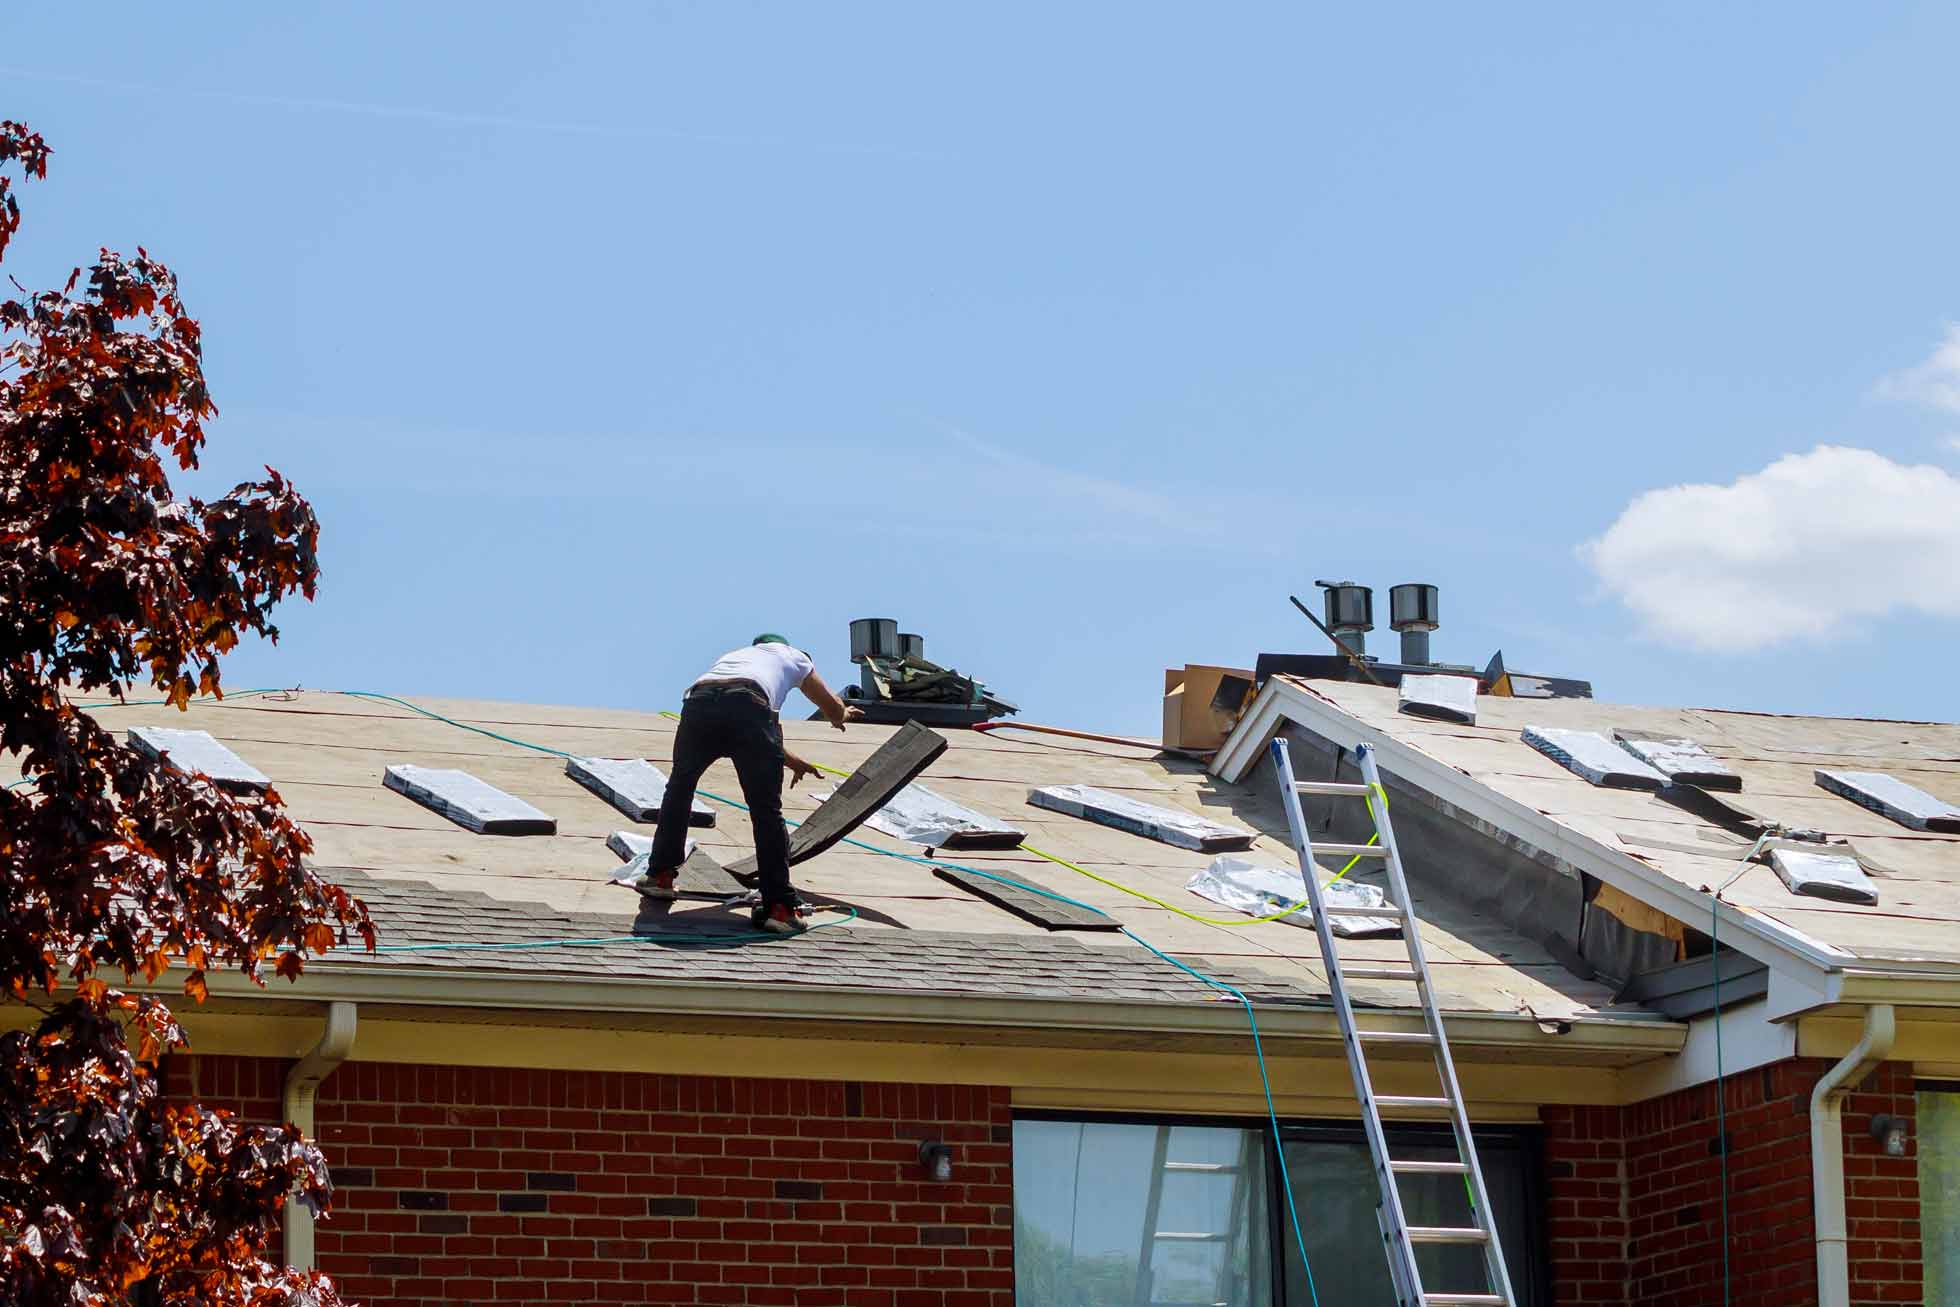 What to consider when finding a roofing contractor